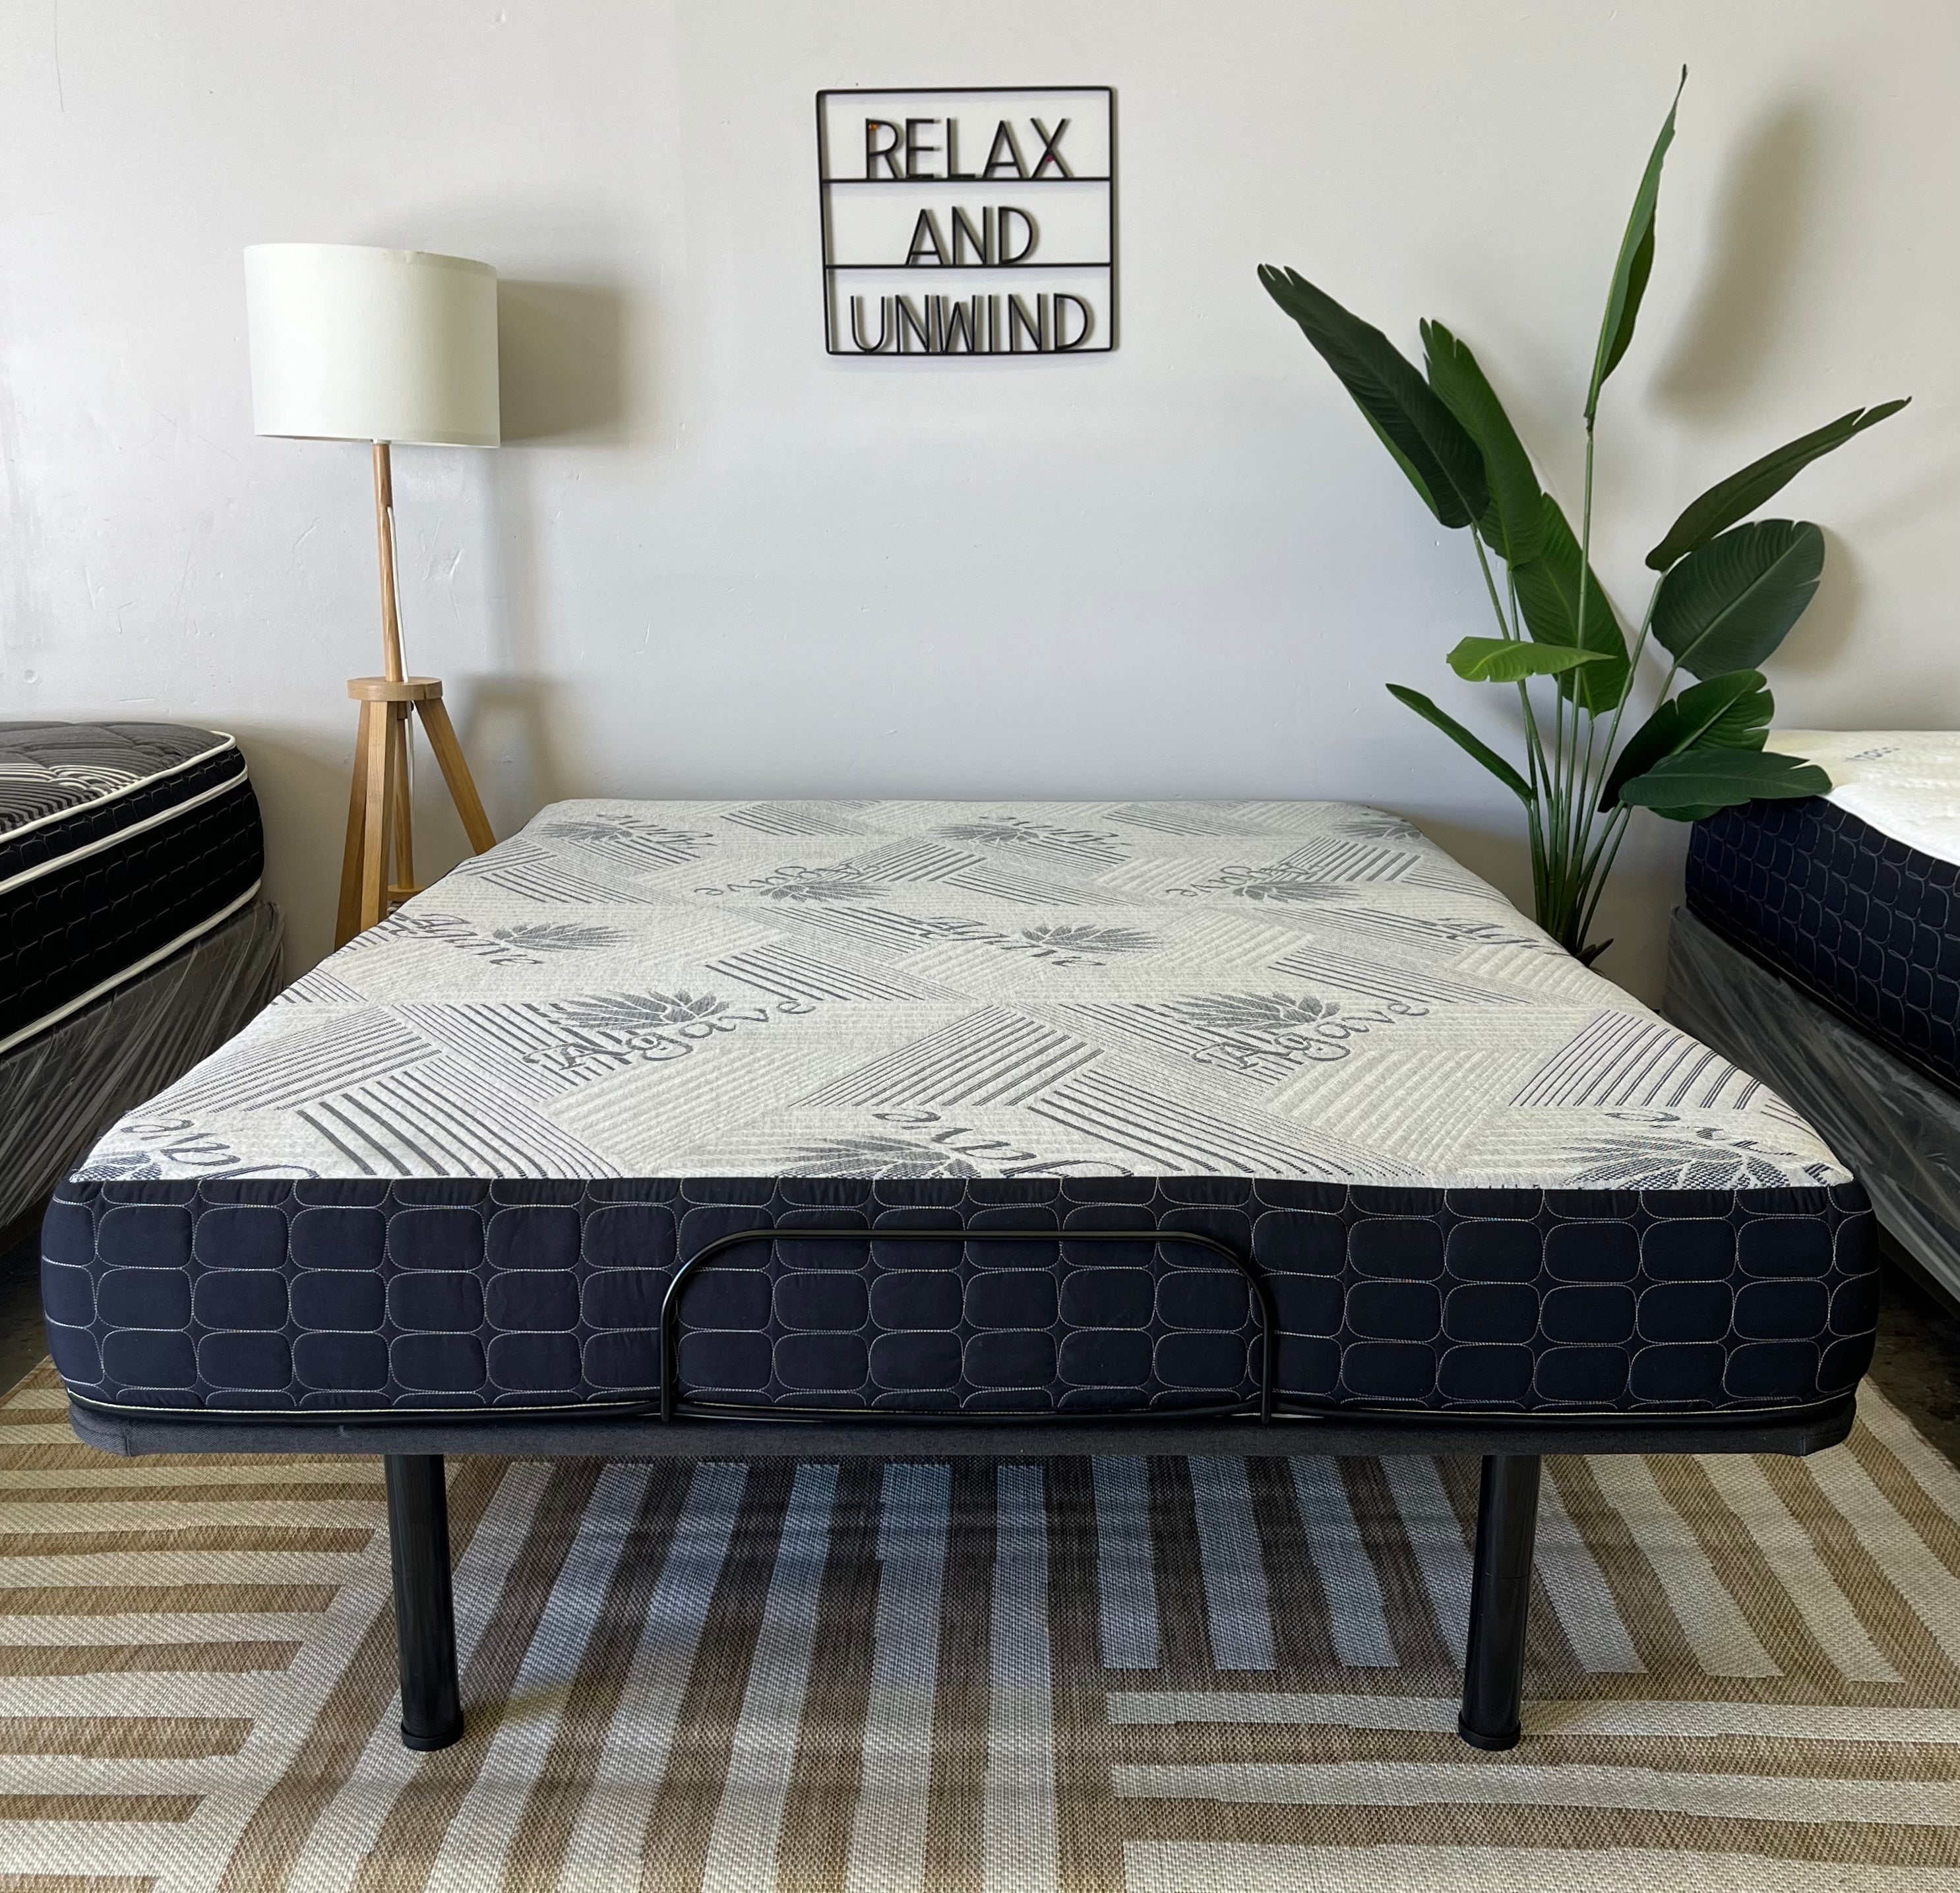 The Plug Package Elite: Mattress, Adjustable Base All In One